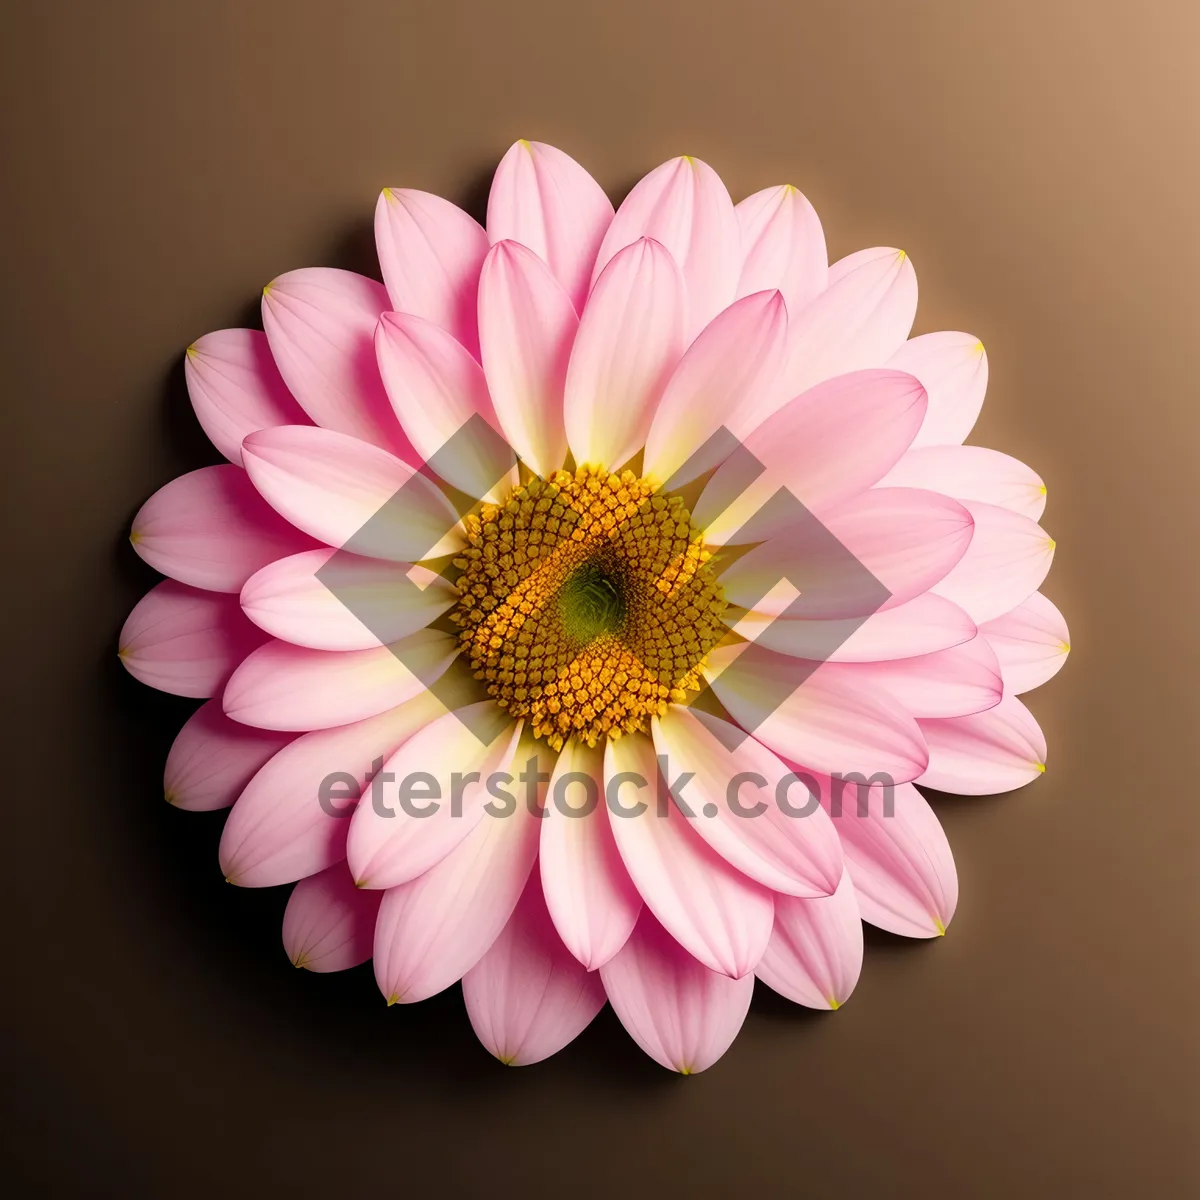 Picture of Pretty Pink Daisy Blossom in Bloom